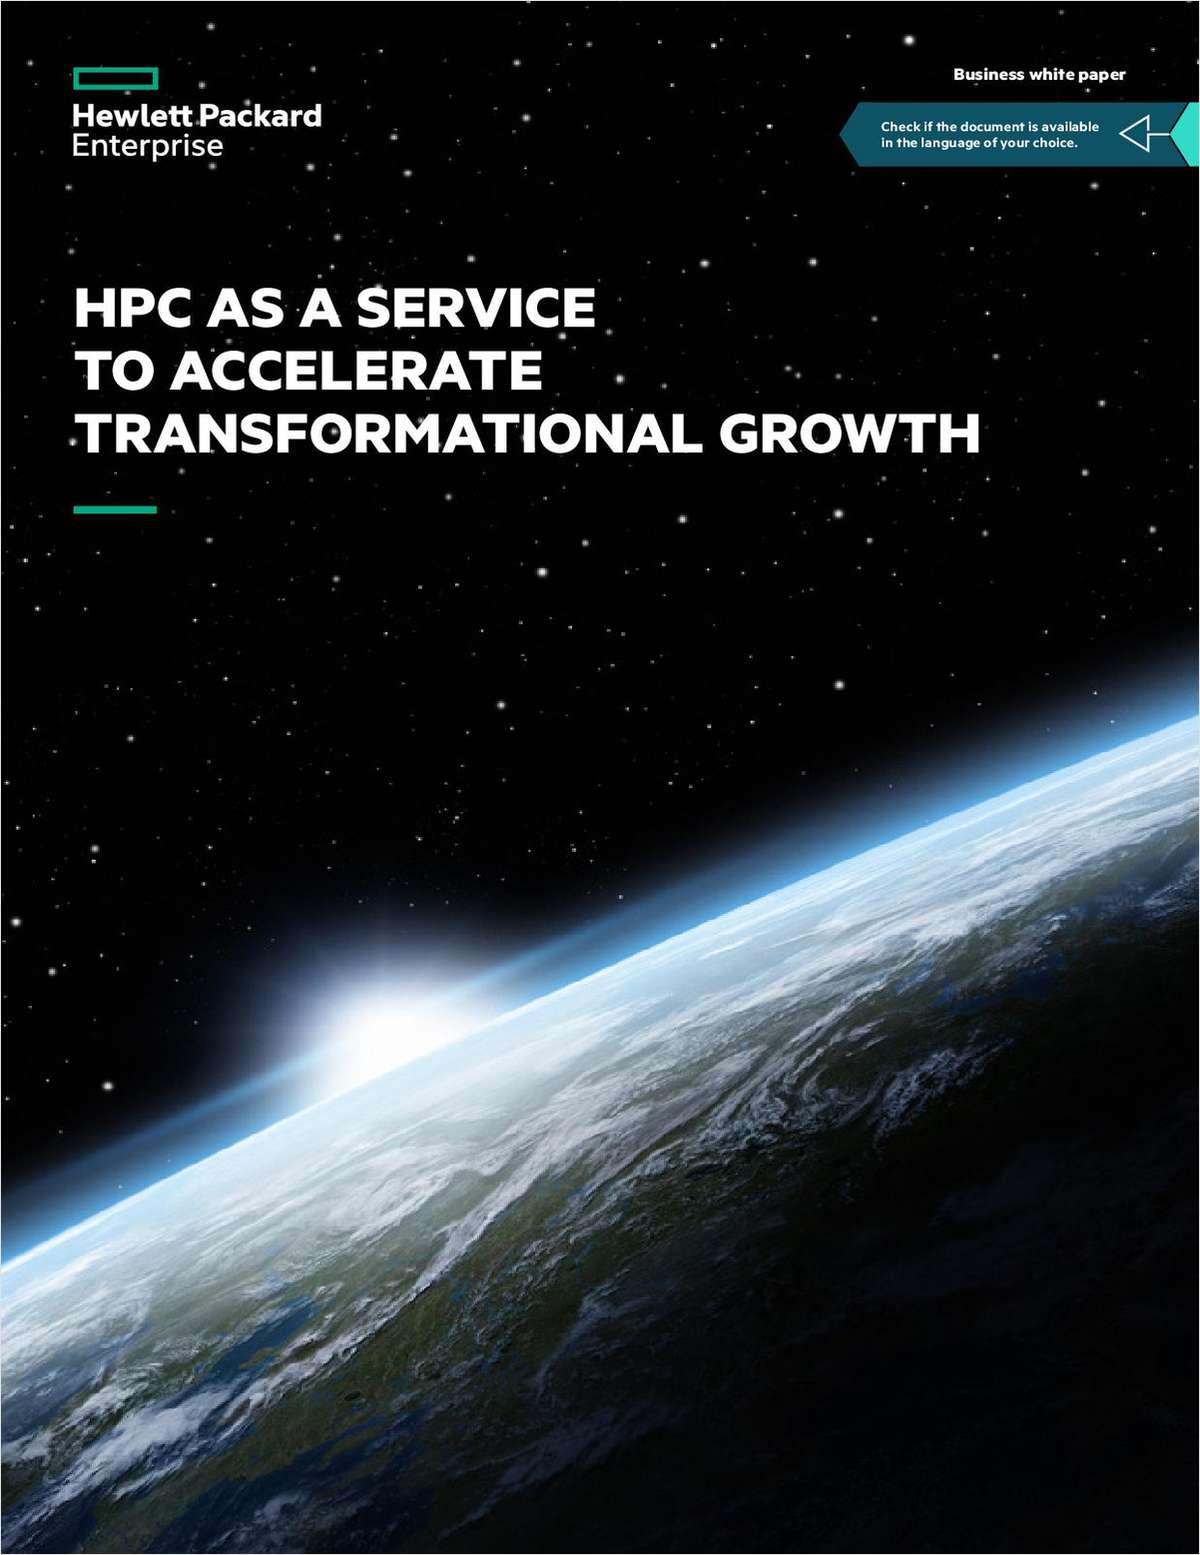 HPC as a Service to Accelerate Transformational Growth